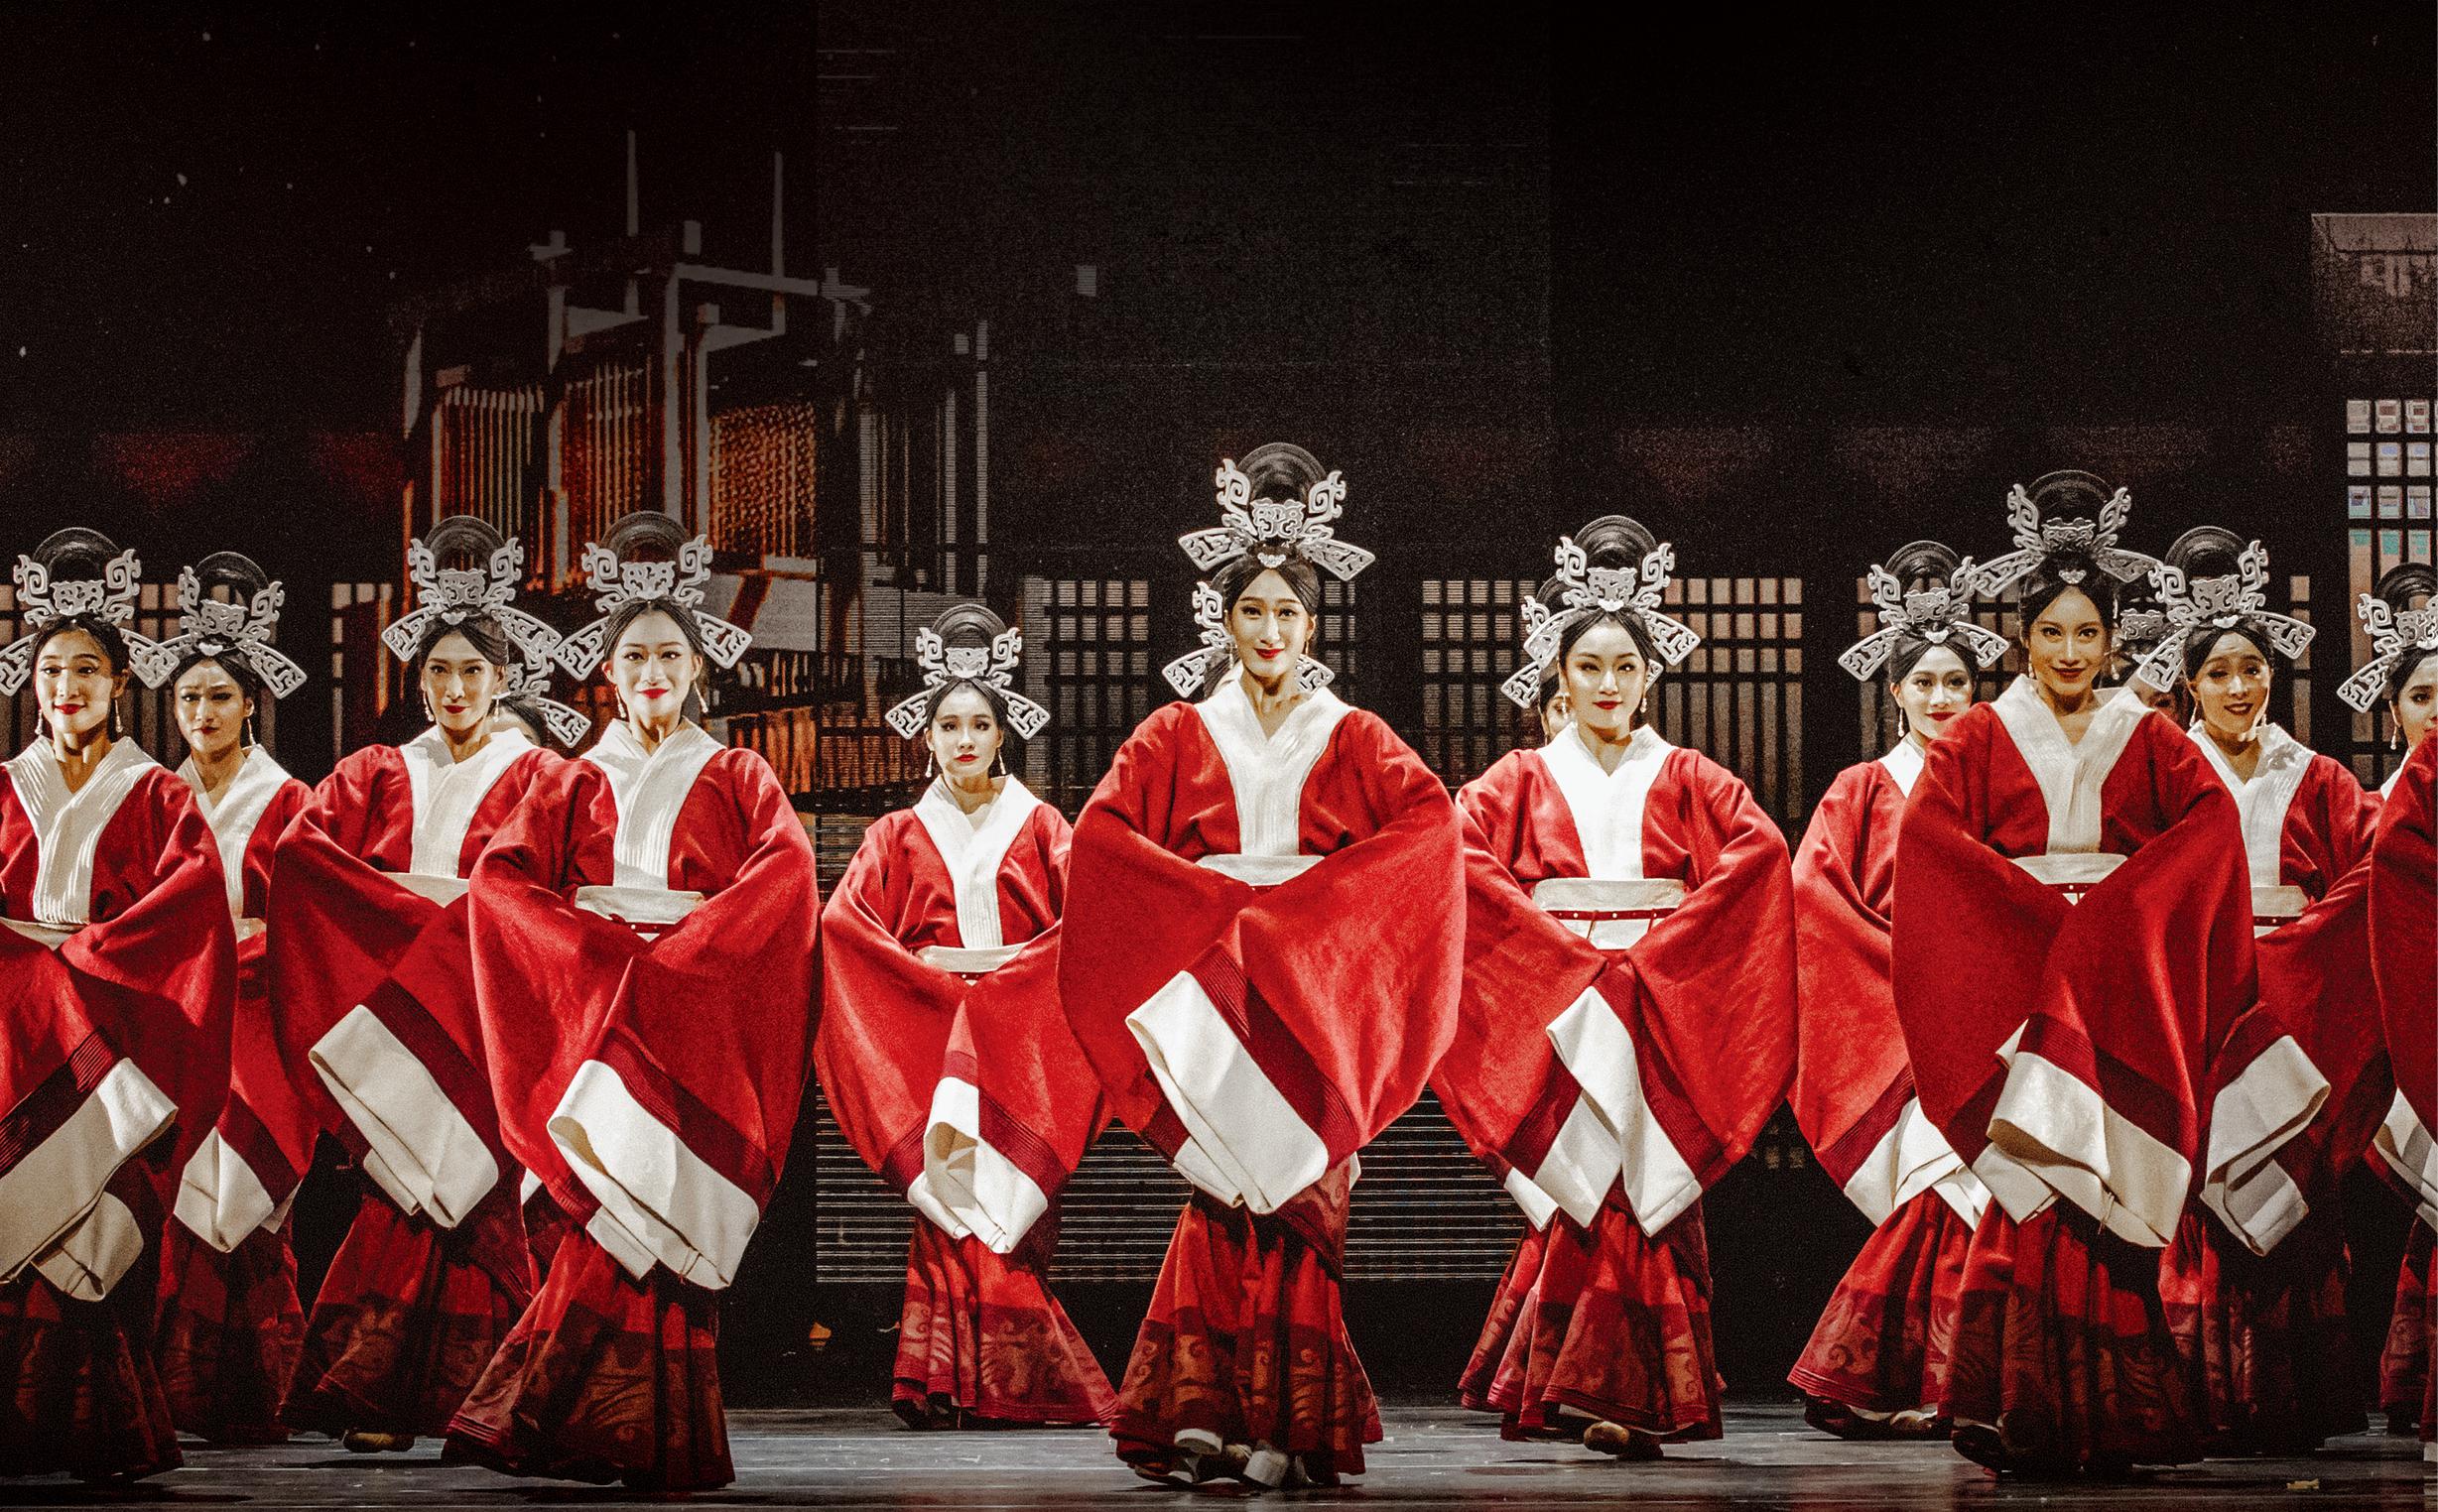 The inaugural Chinese Culture Festival will be held from June to September. Photo shows the opening programme - Dance Drama: "Five Stars Rising in the East" by the Beijing Dance Drama and Opera.